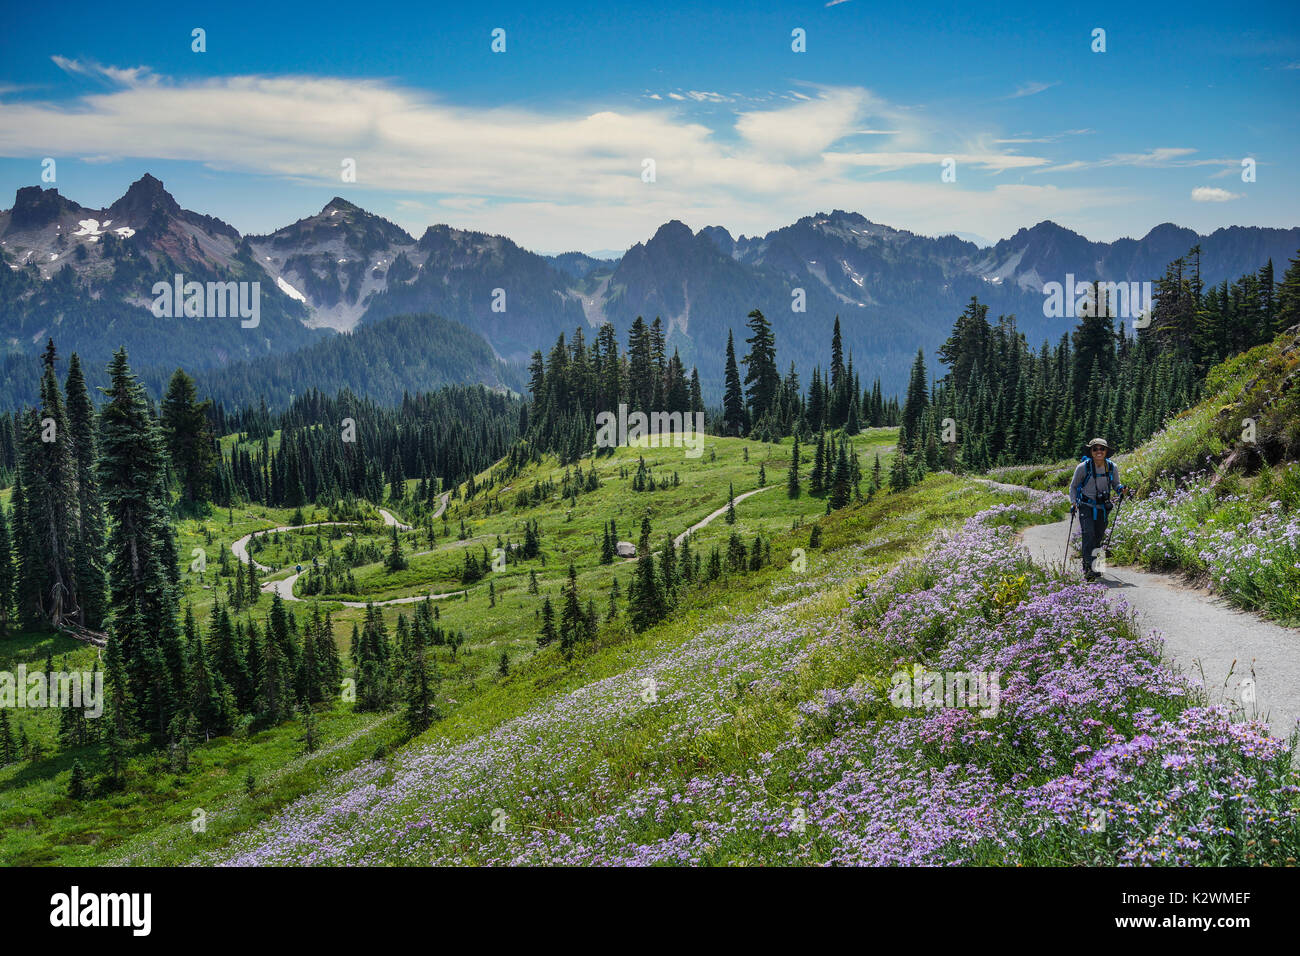 A hiker is hiking in the field at Deadhorse trail with Mount Rainier in the background, Washington. Stock Photo